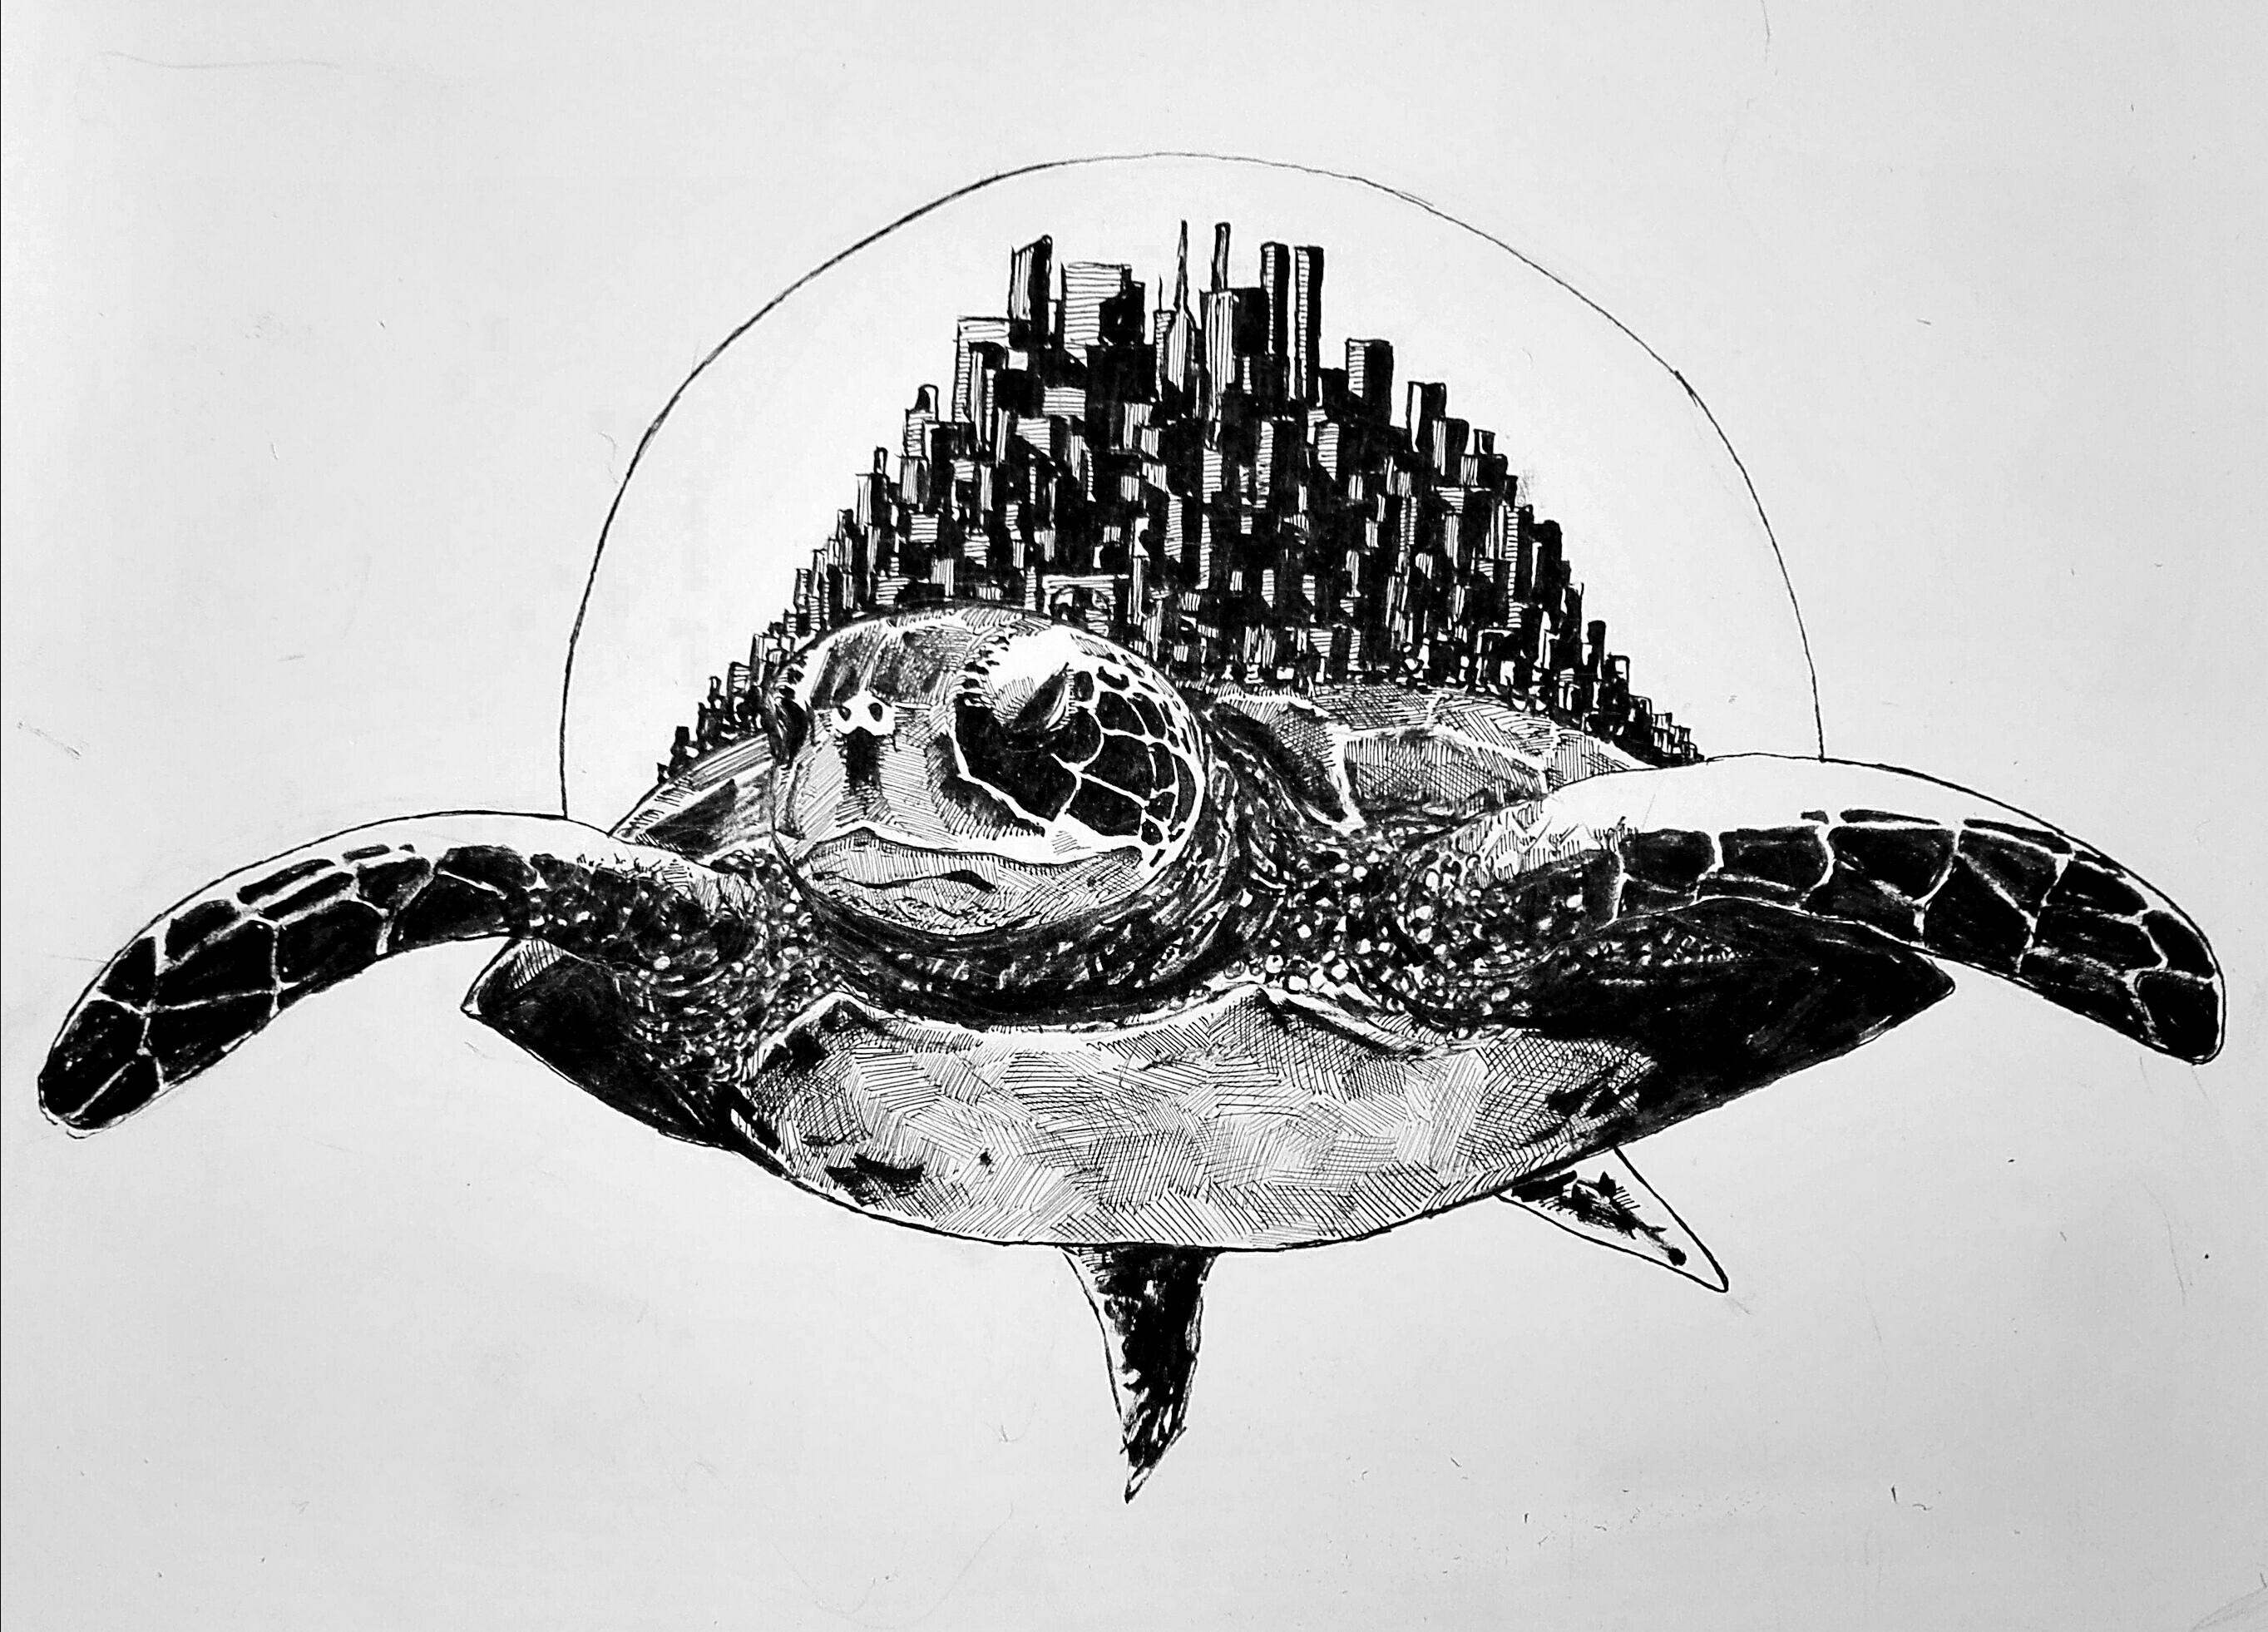 Space turtle, pen and ink, A4 : Art